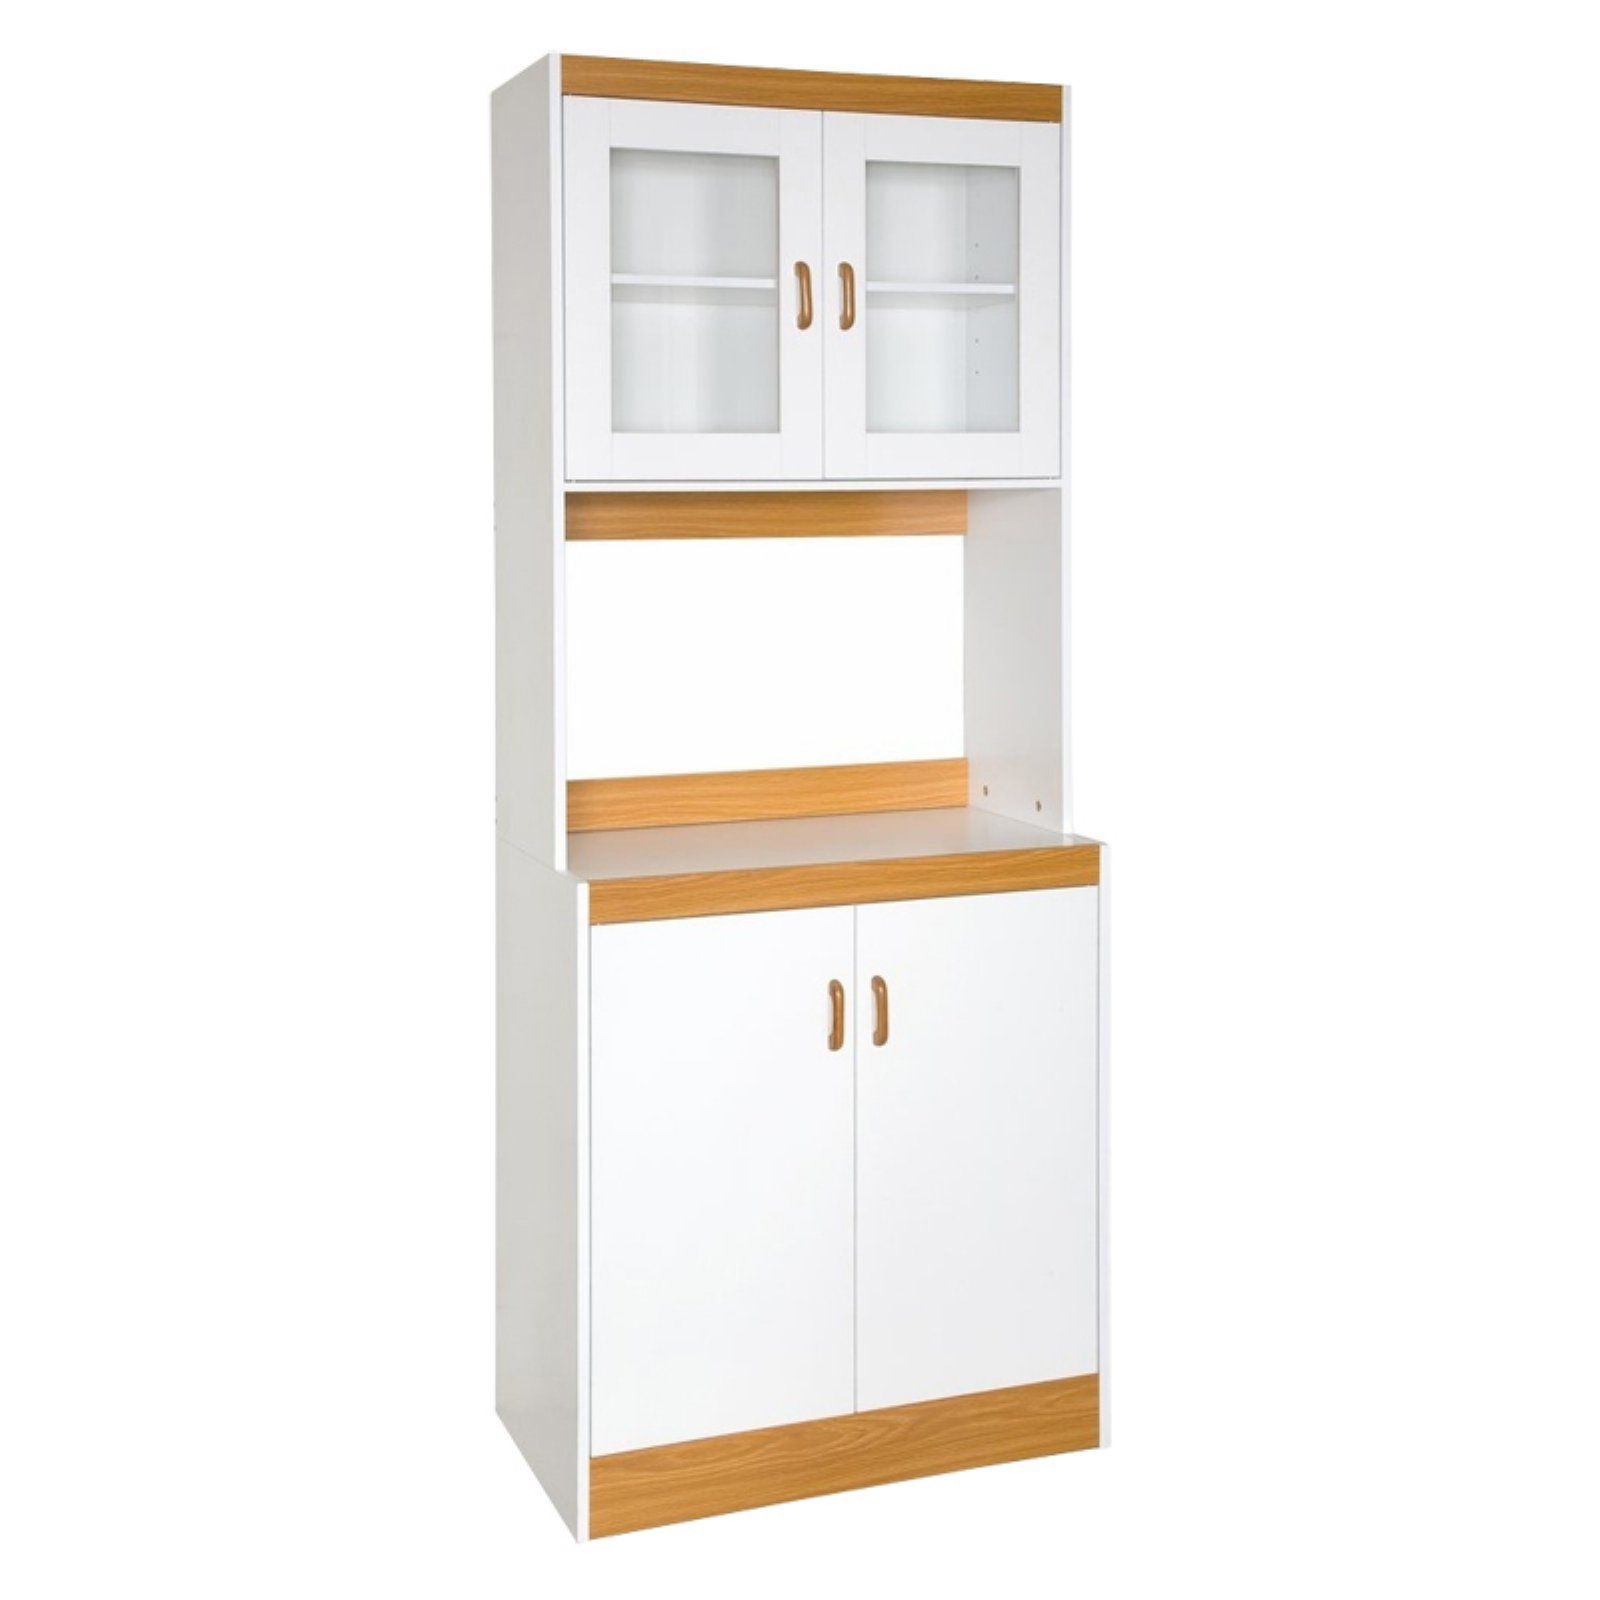 Home Source Industries 153BRD Tall Kitchen Cabinet with Solid-Door below Shelf and Glass Doors, White with Light Wood Trim